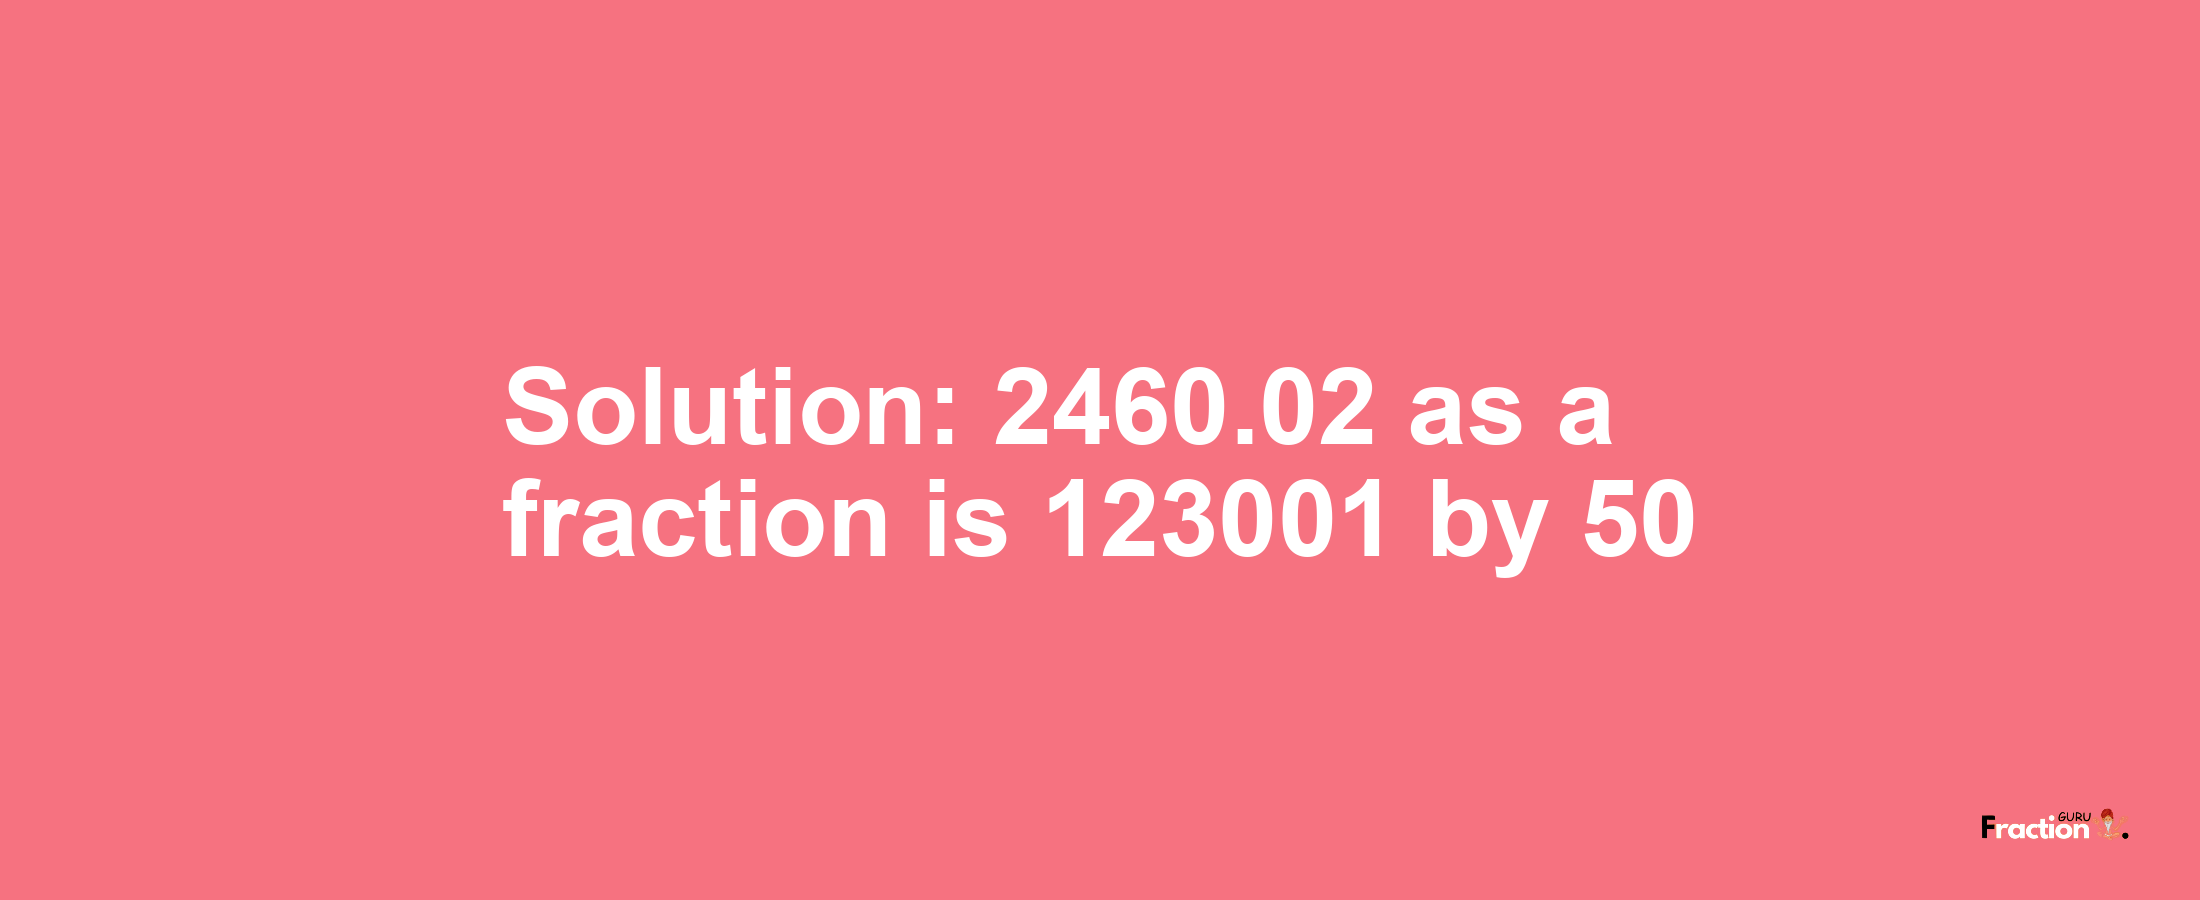 Solution:2460.02 as a fraction is 123001/50